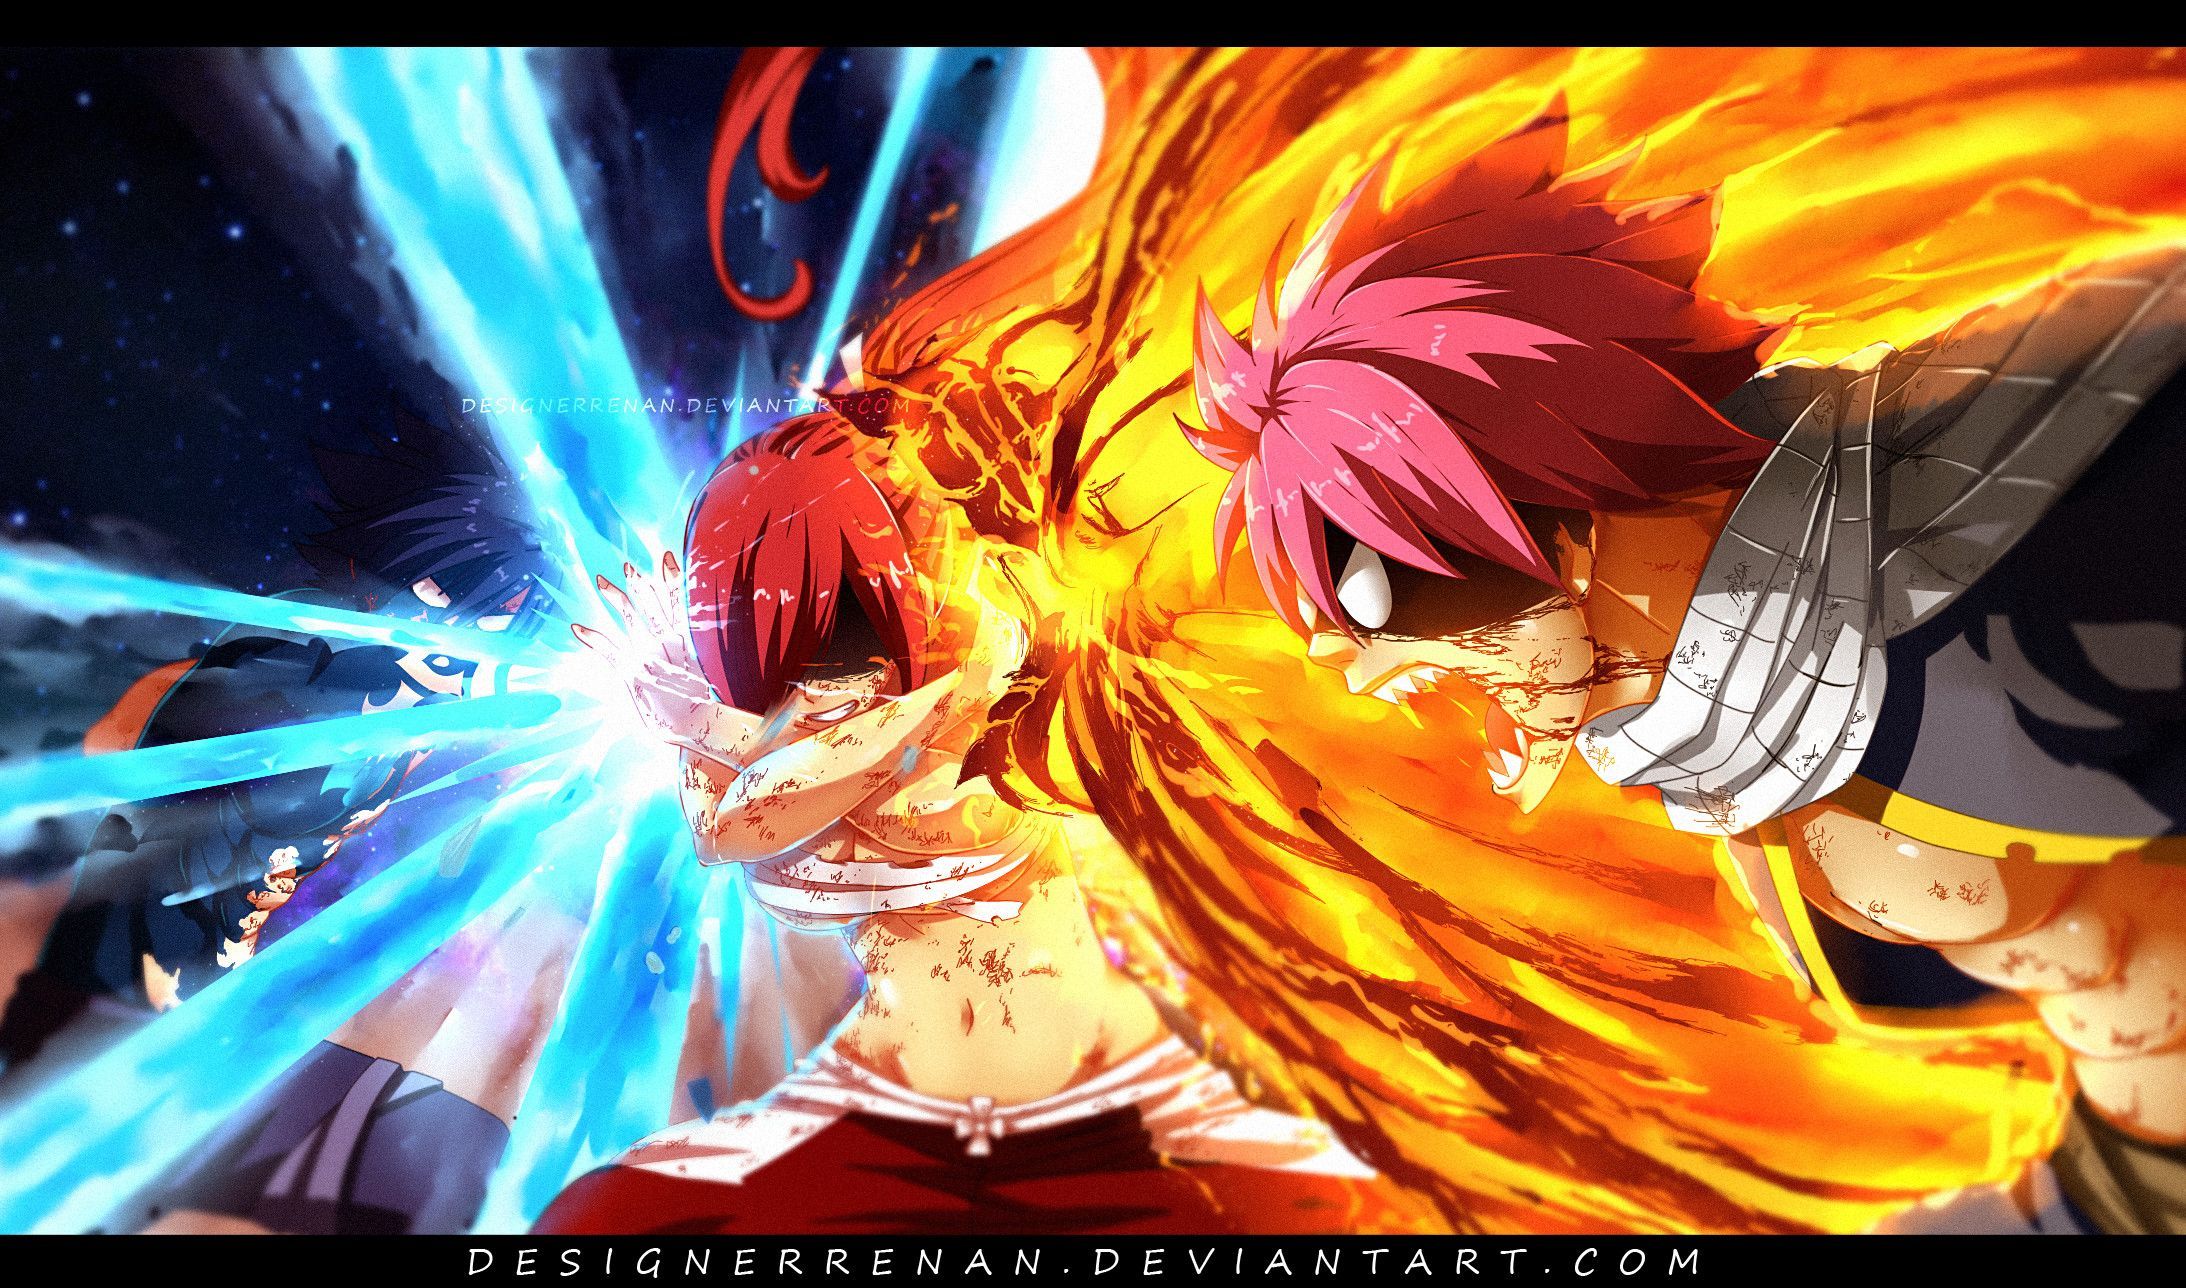 Anime Tail Erza Scarlet Gray Fullbuster Natsu Dragneel Wallpaper 2186x1288. Fairy tail anime, Fairy tail picture, Fairy tail